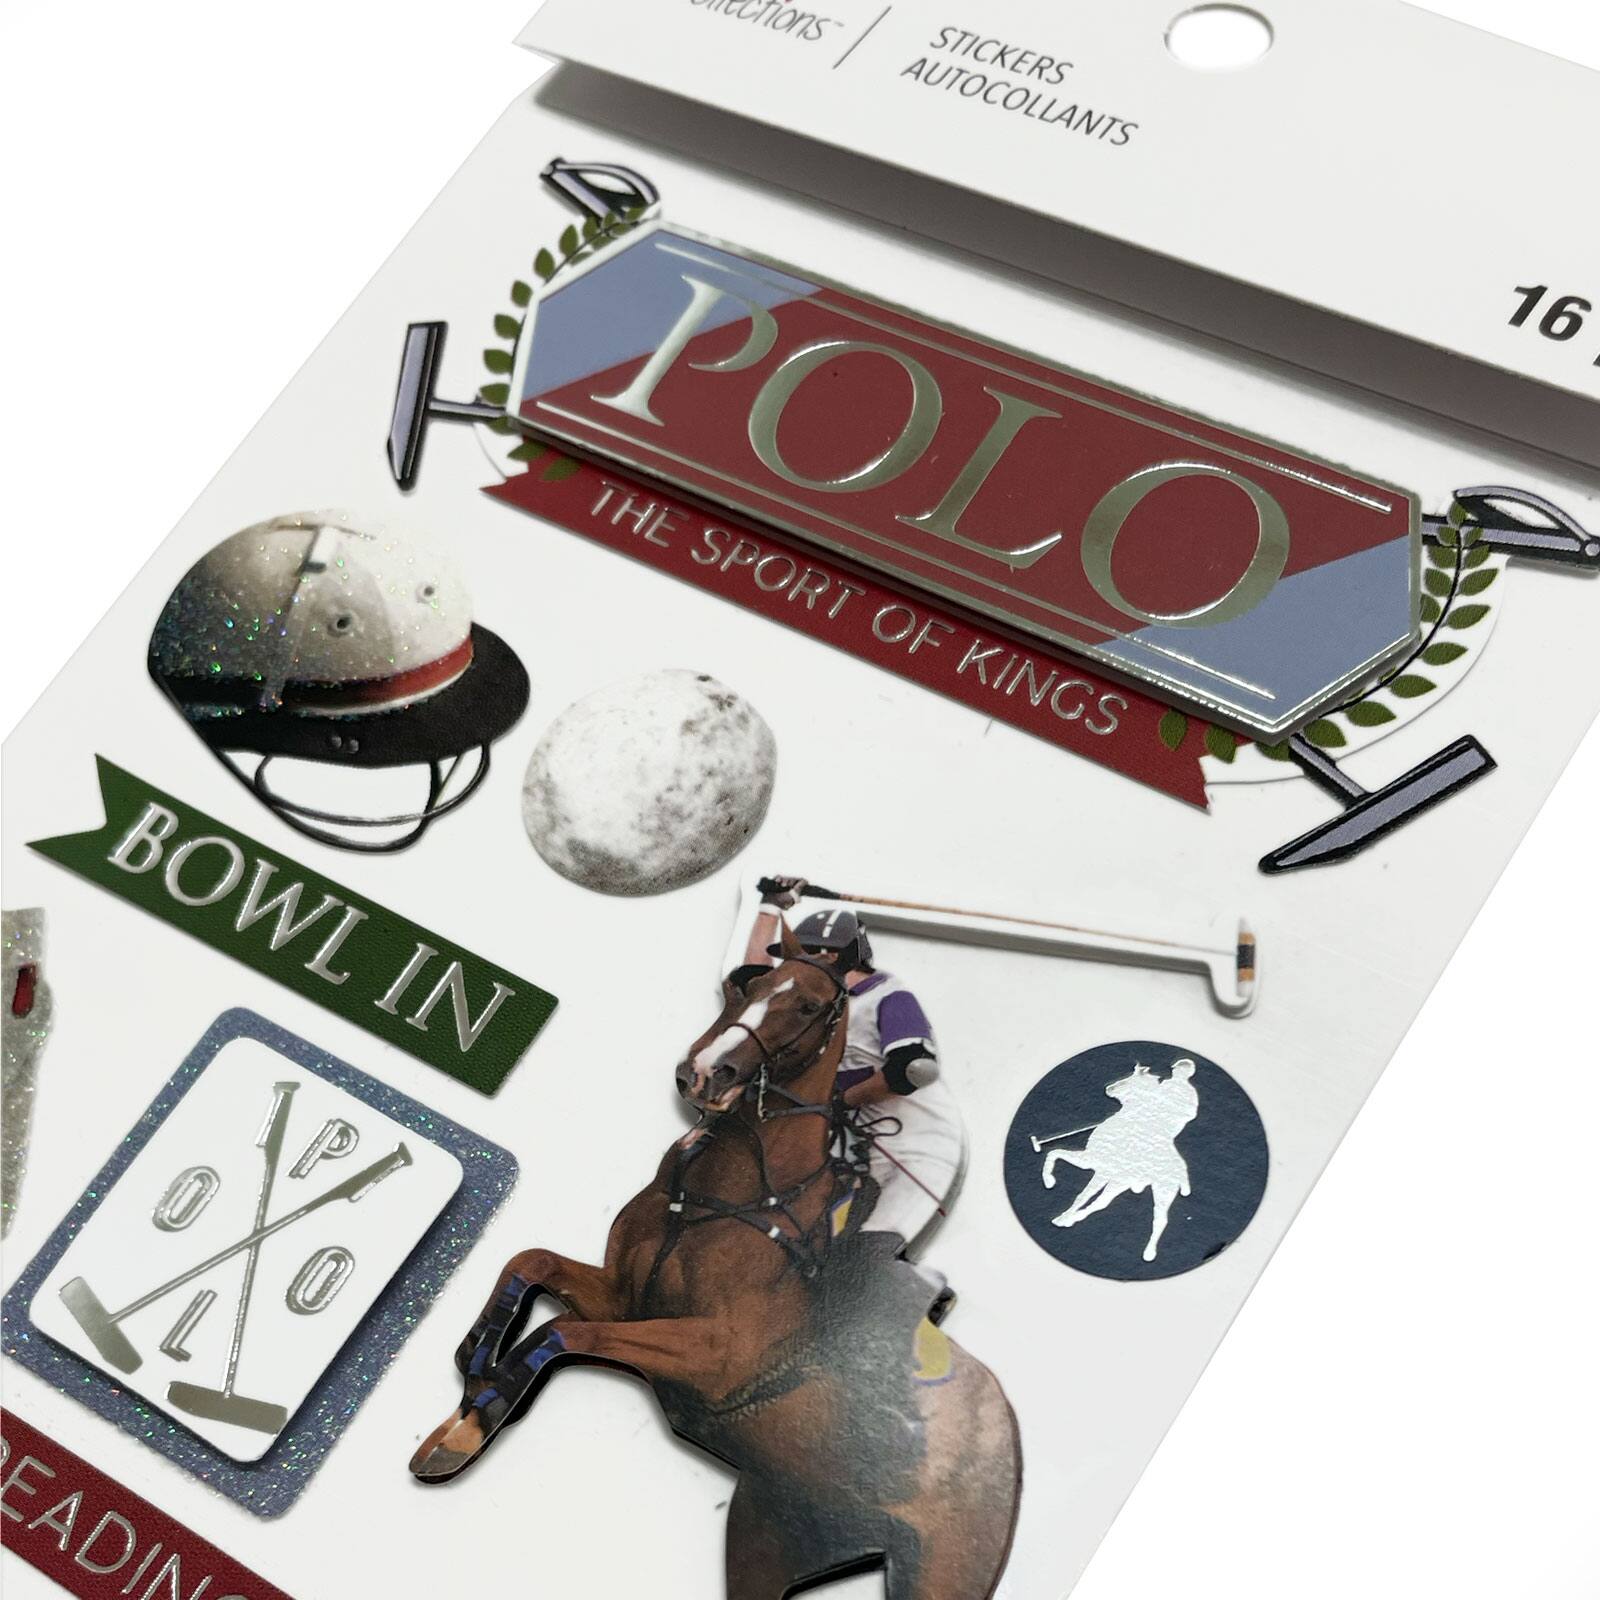 Polo Dimensional Stickers by Recollections&#x2122;